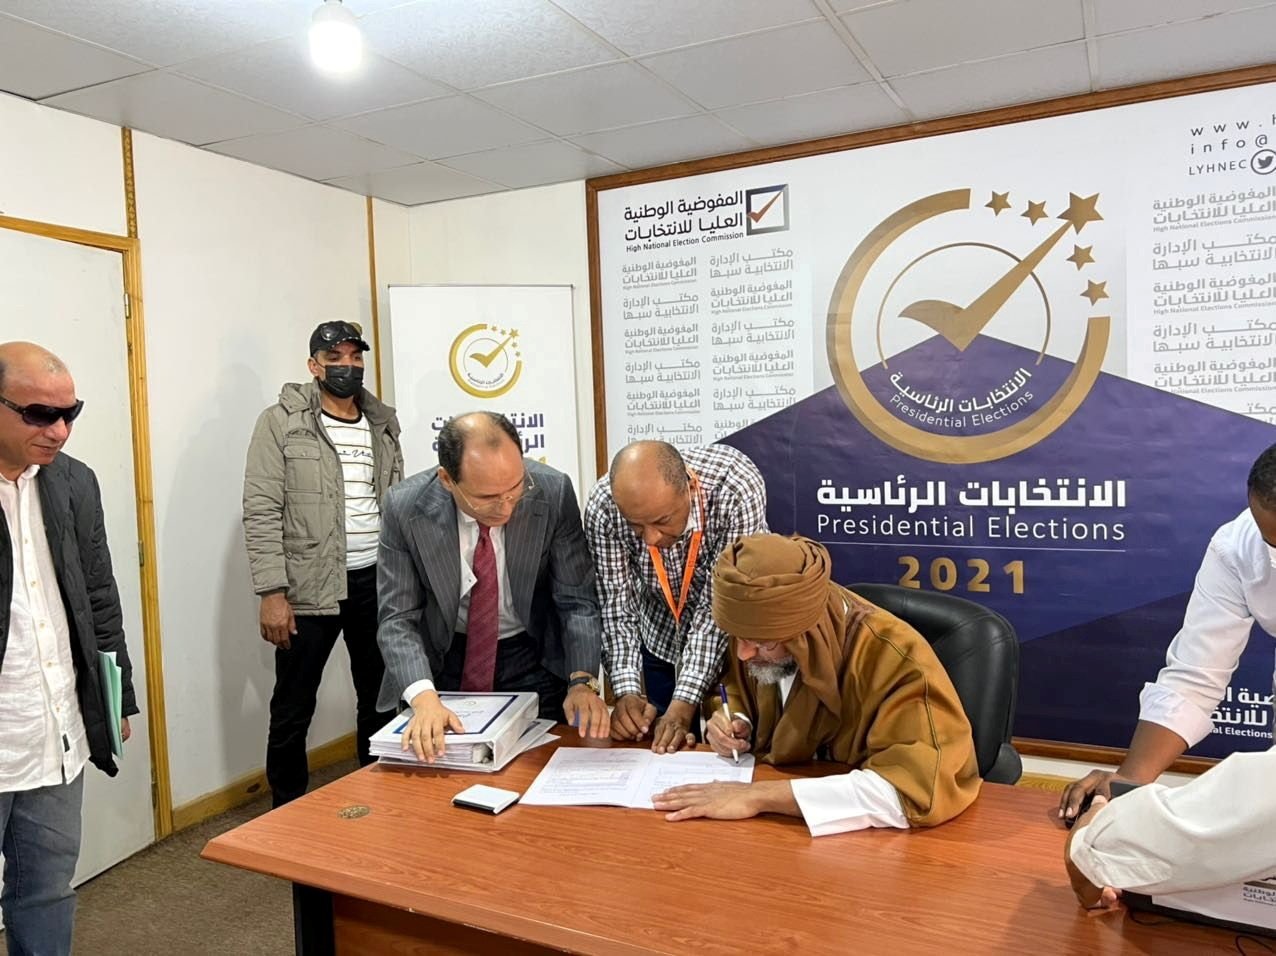 Seif al-Islam Gadhafi, son of Libya&#039;s former leader Moammar Gadhafi, registers as a presidential candidate for the Dec. 24 election, at the registration center in the southern town of Sebha, Libya, Nov. 14, 2021. (Reuters File Photo)